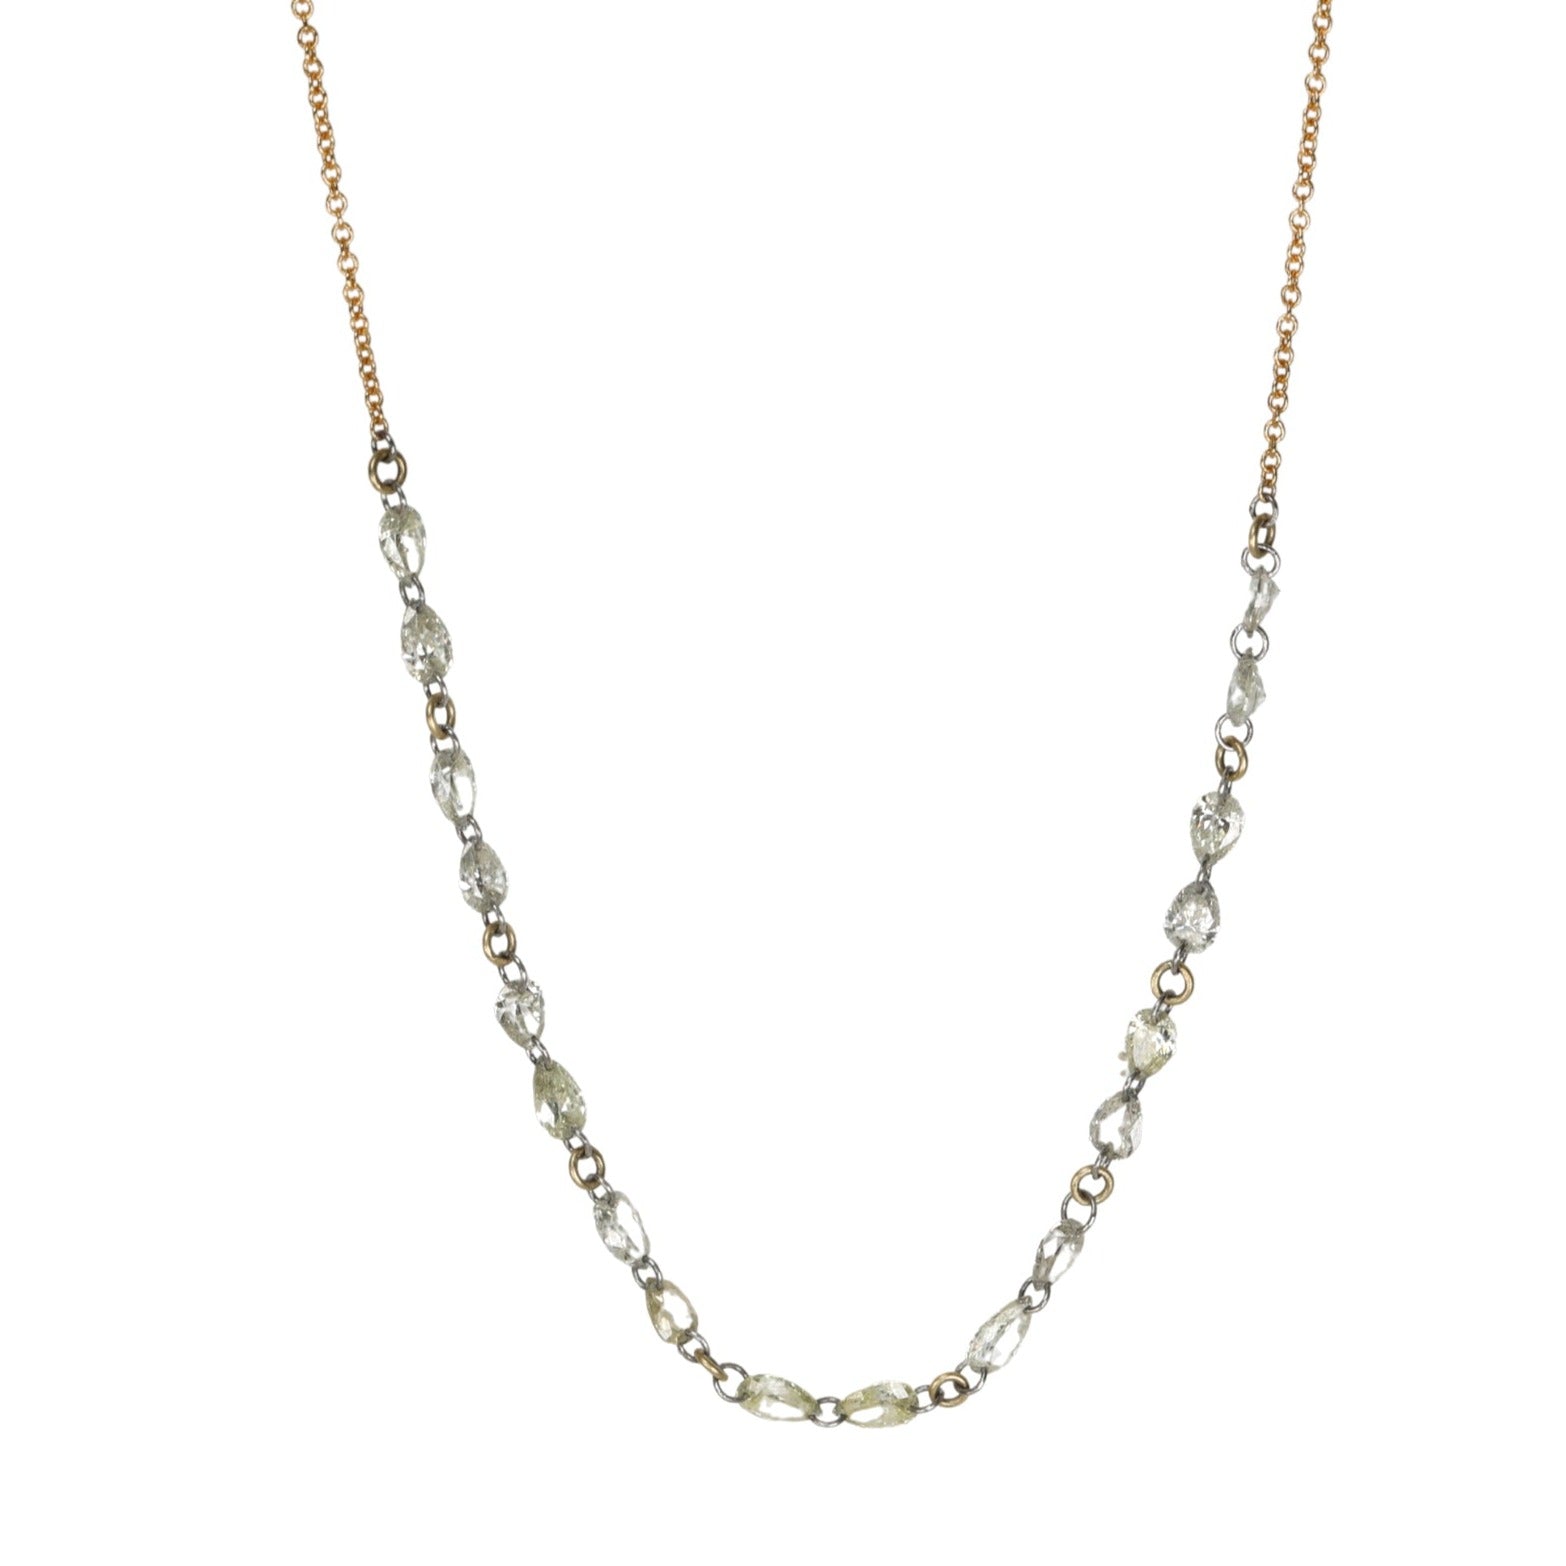 In-Line Free-Set Necklace with Mixed Pear Shaped Diamonds - Peridot Fine Jewelry - TAP by Todd Pownell